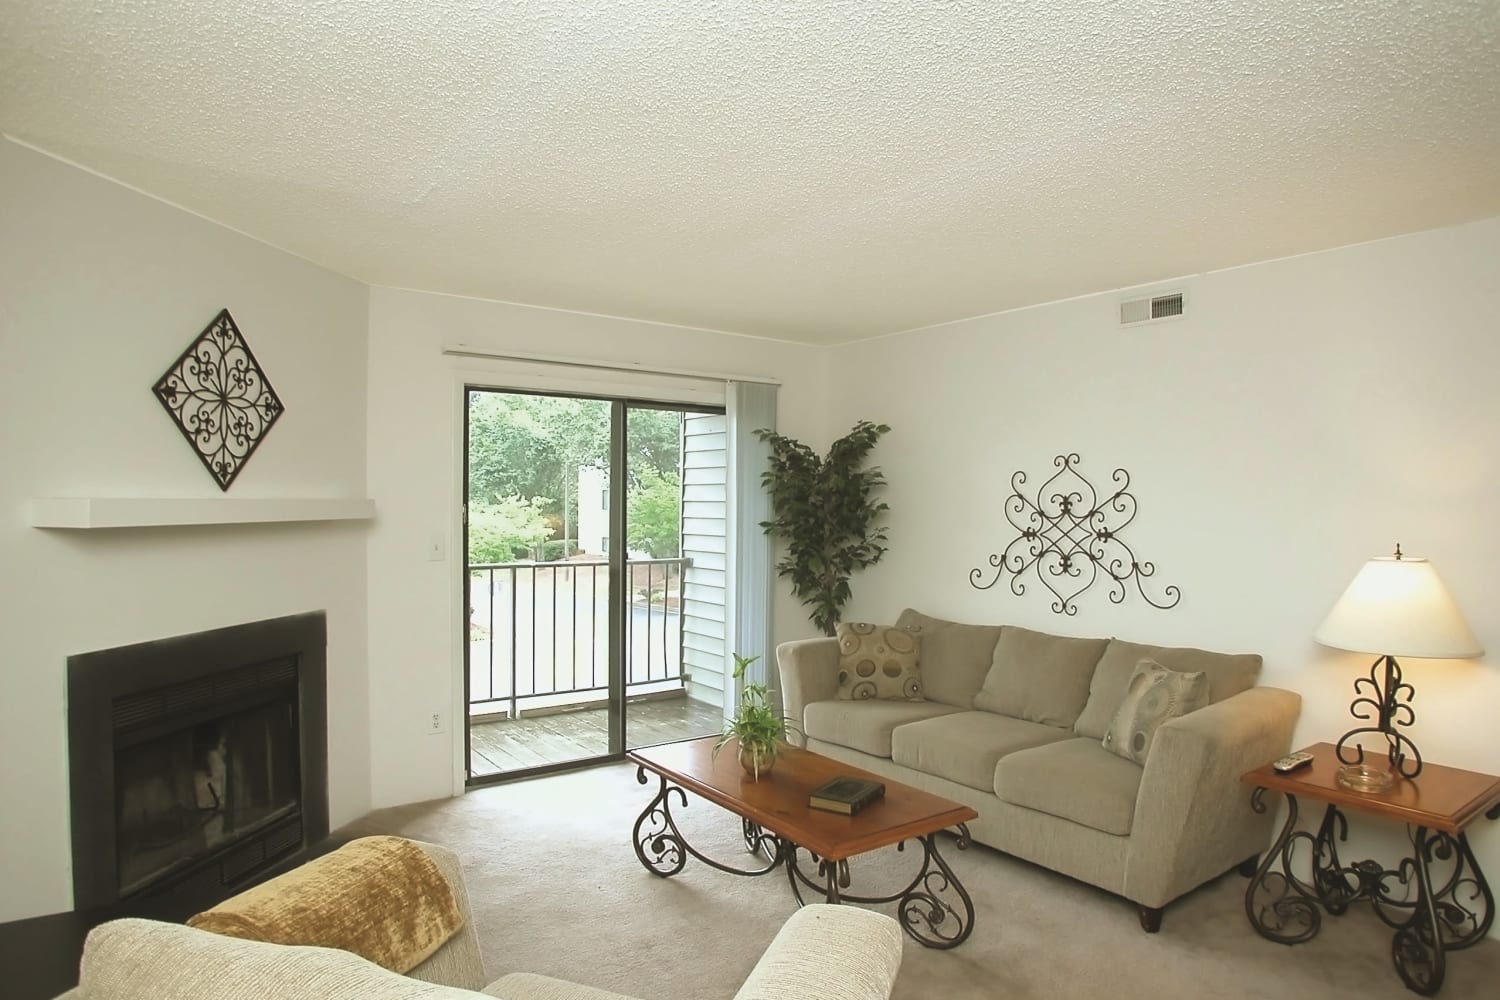 Living room with a fireplace and private patio access at Stonesthrow Apartment Homes in Greenville, South Carolina